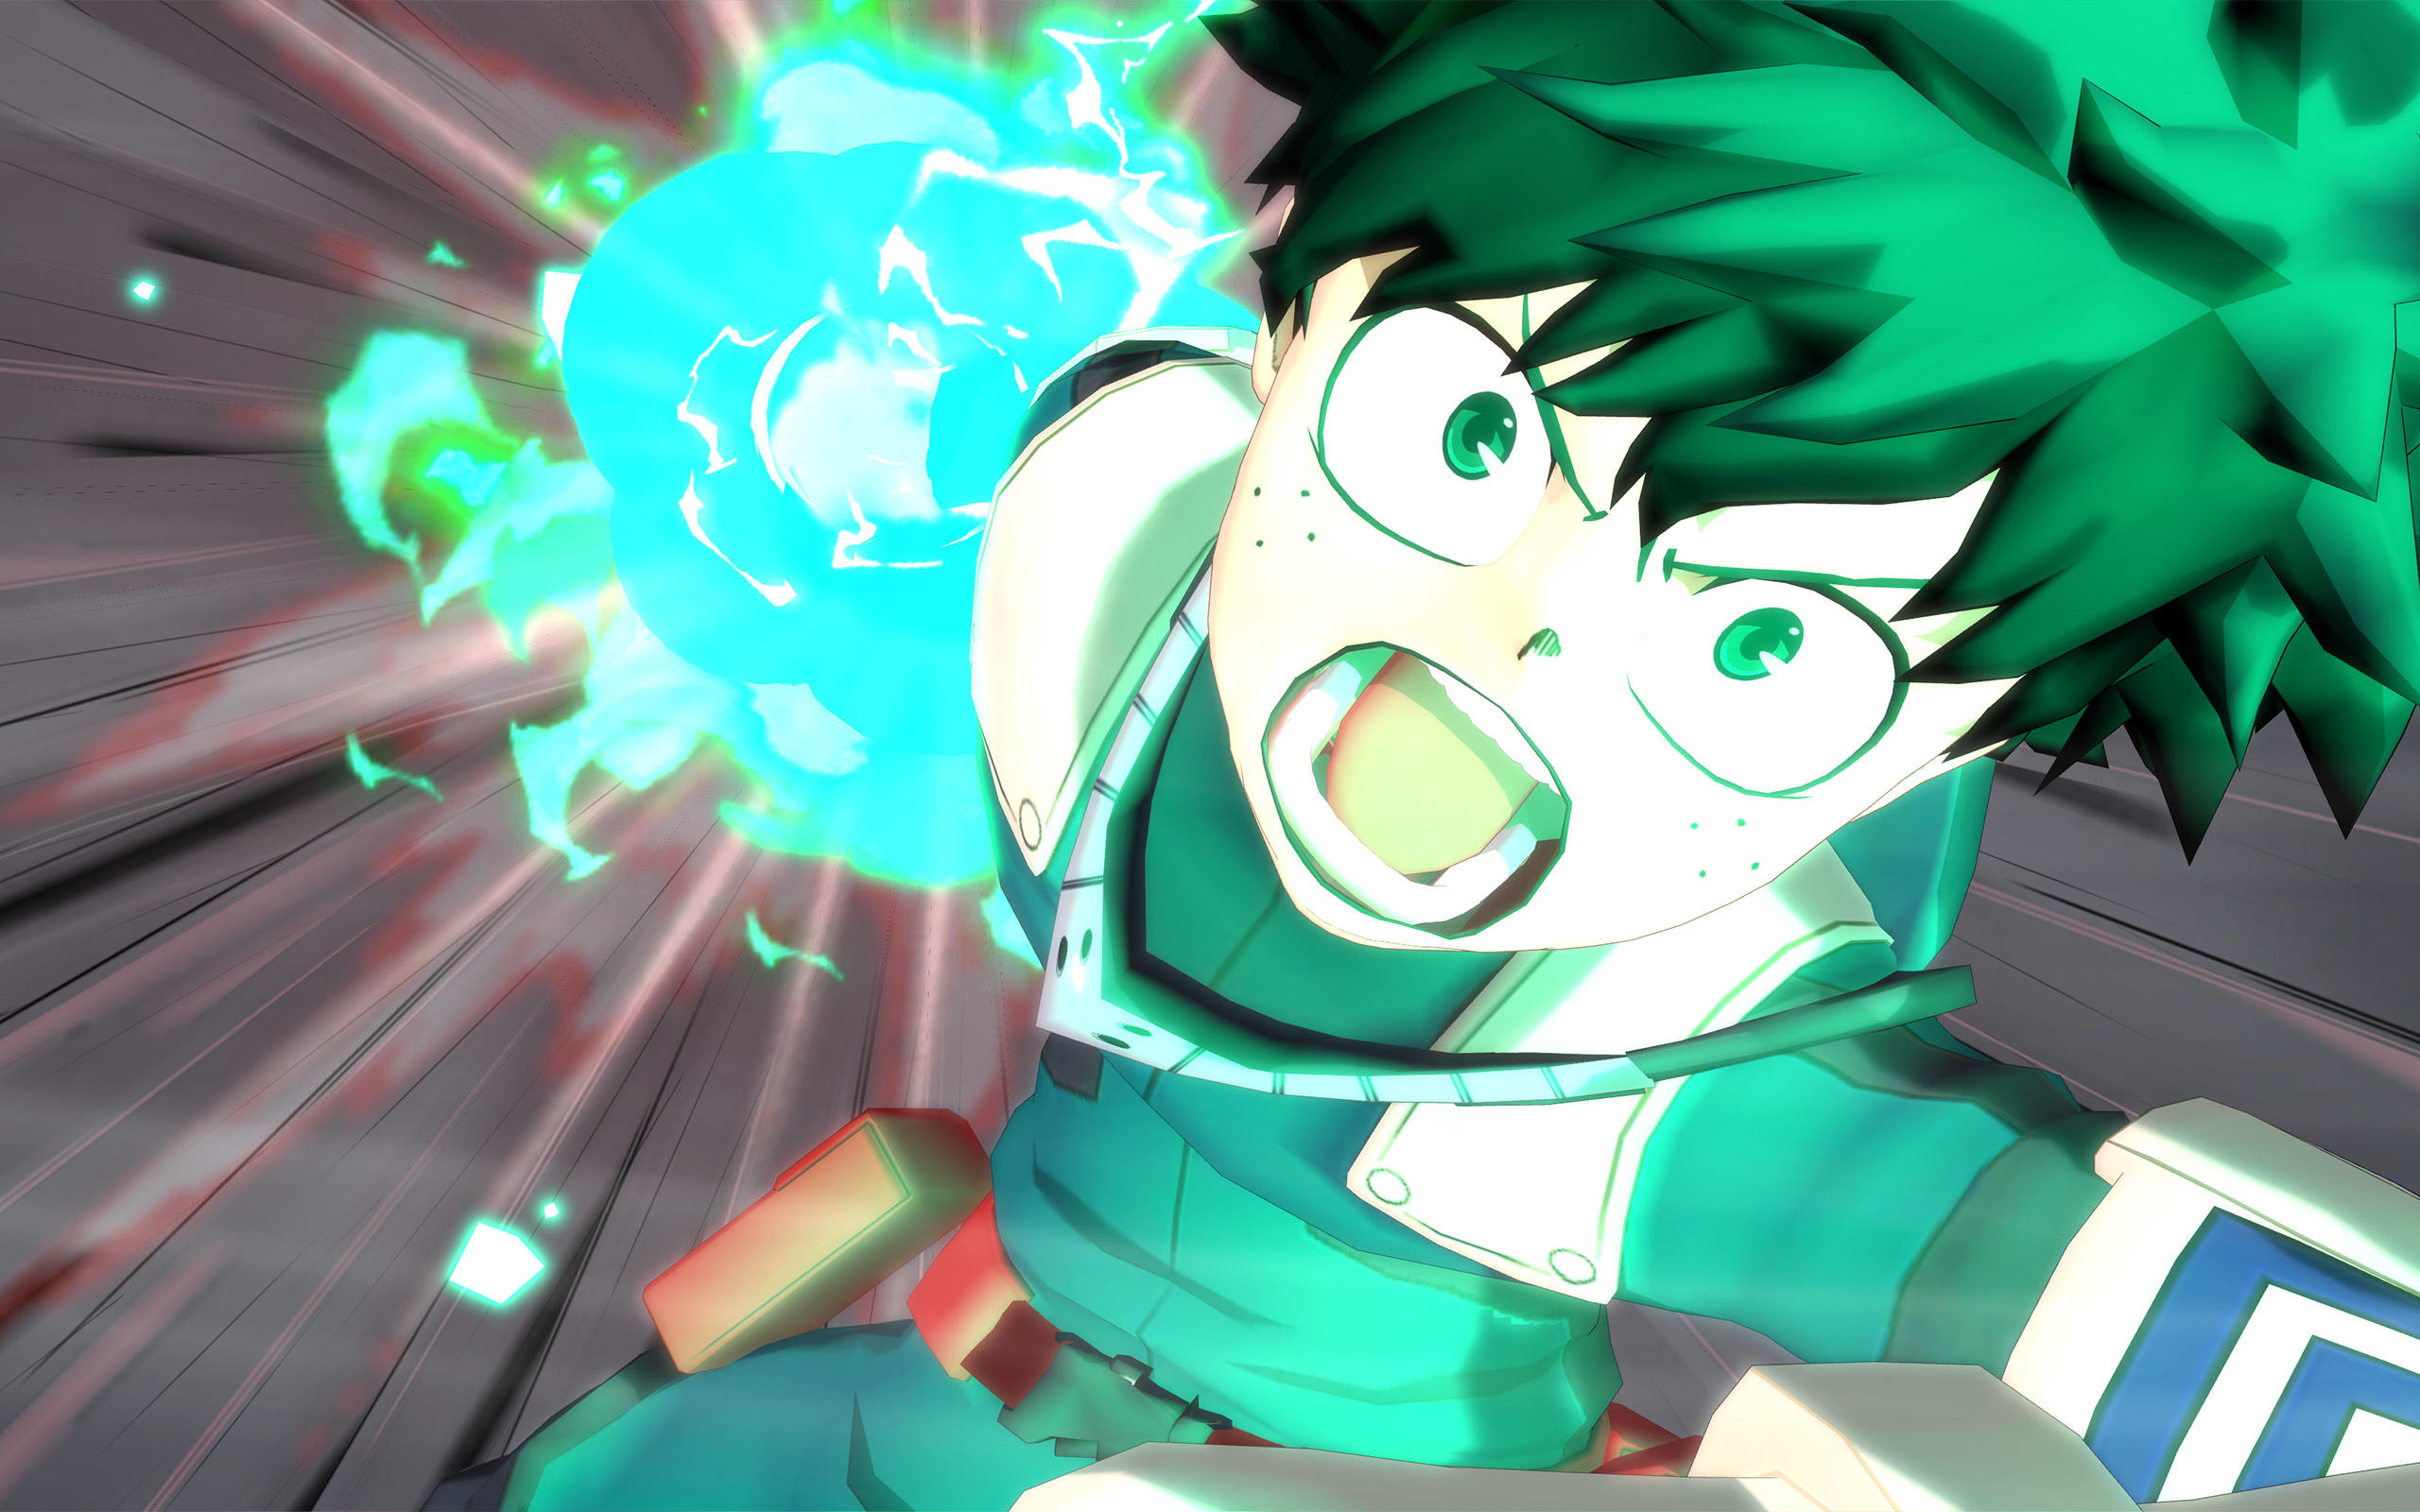 My hero academia：tsh-sea android iOS apk download for free-TapTap